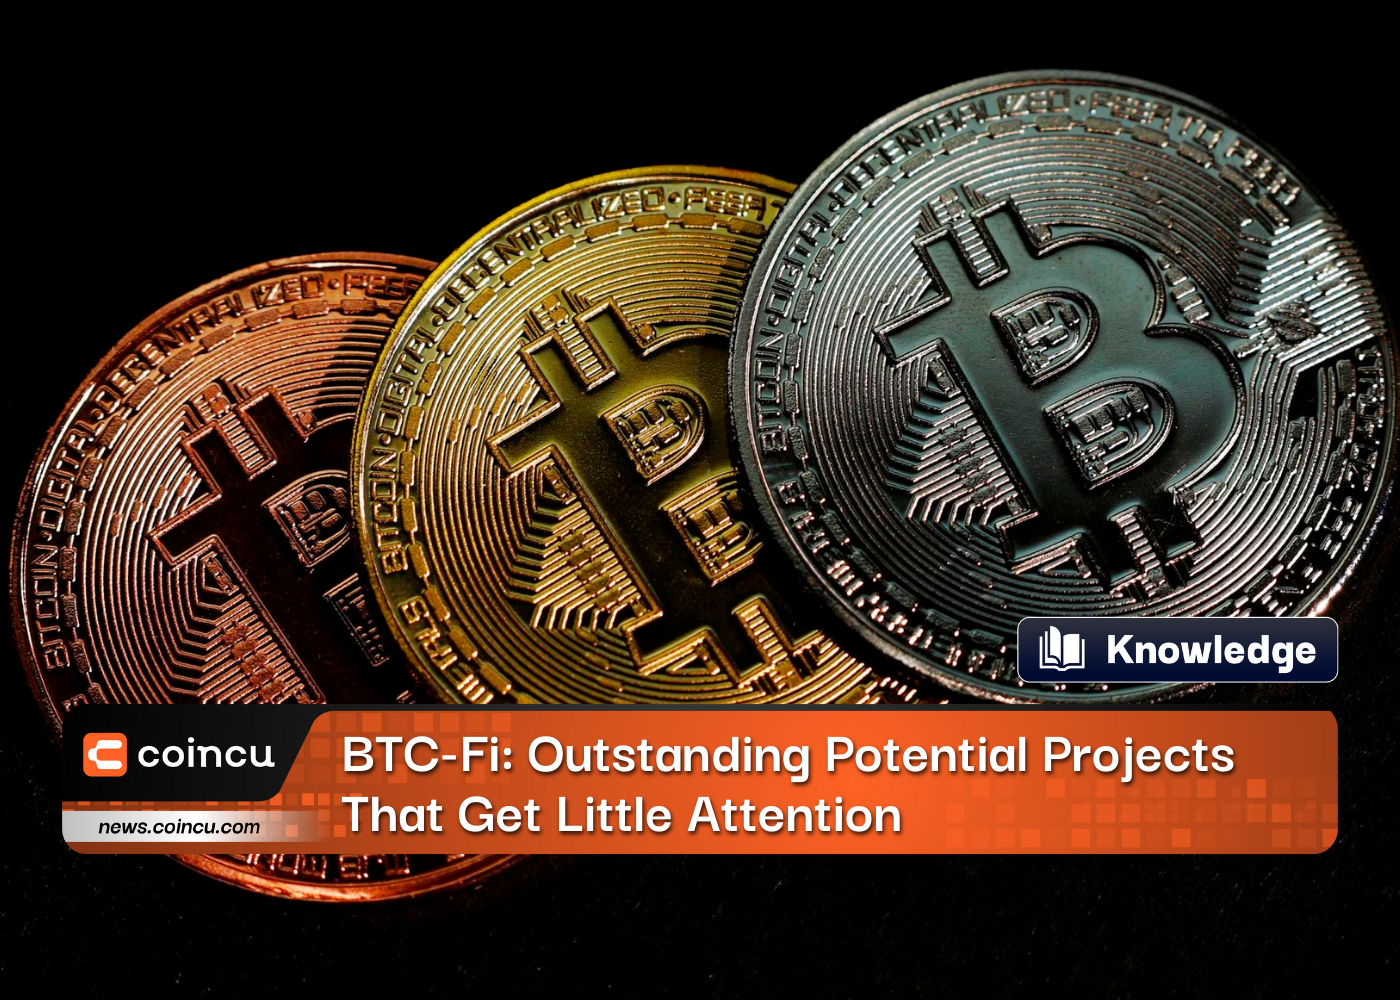 BTC-Fi: Outstanding Potential Projects That Get Little Attention